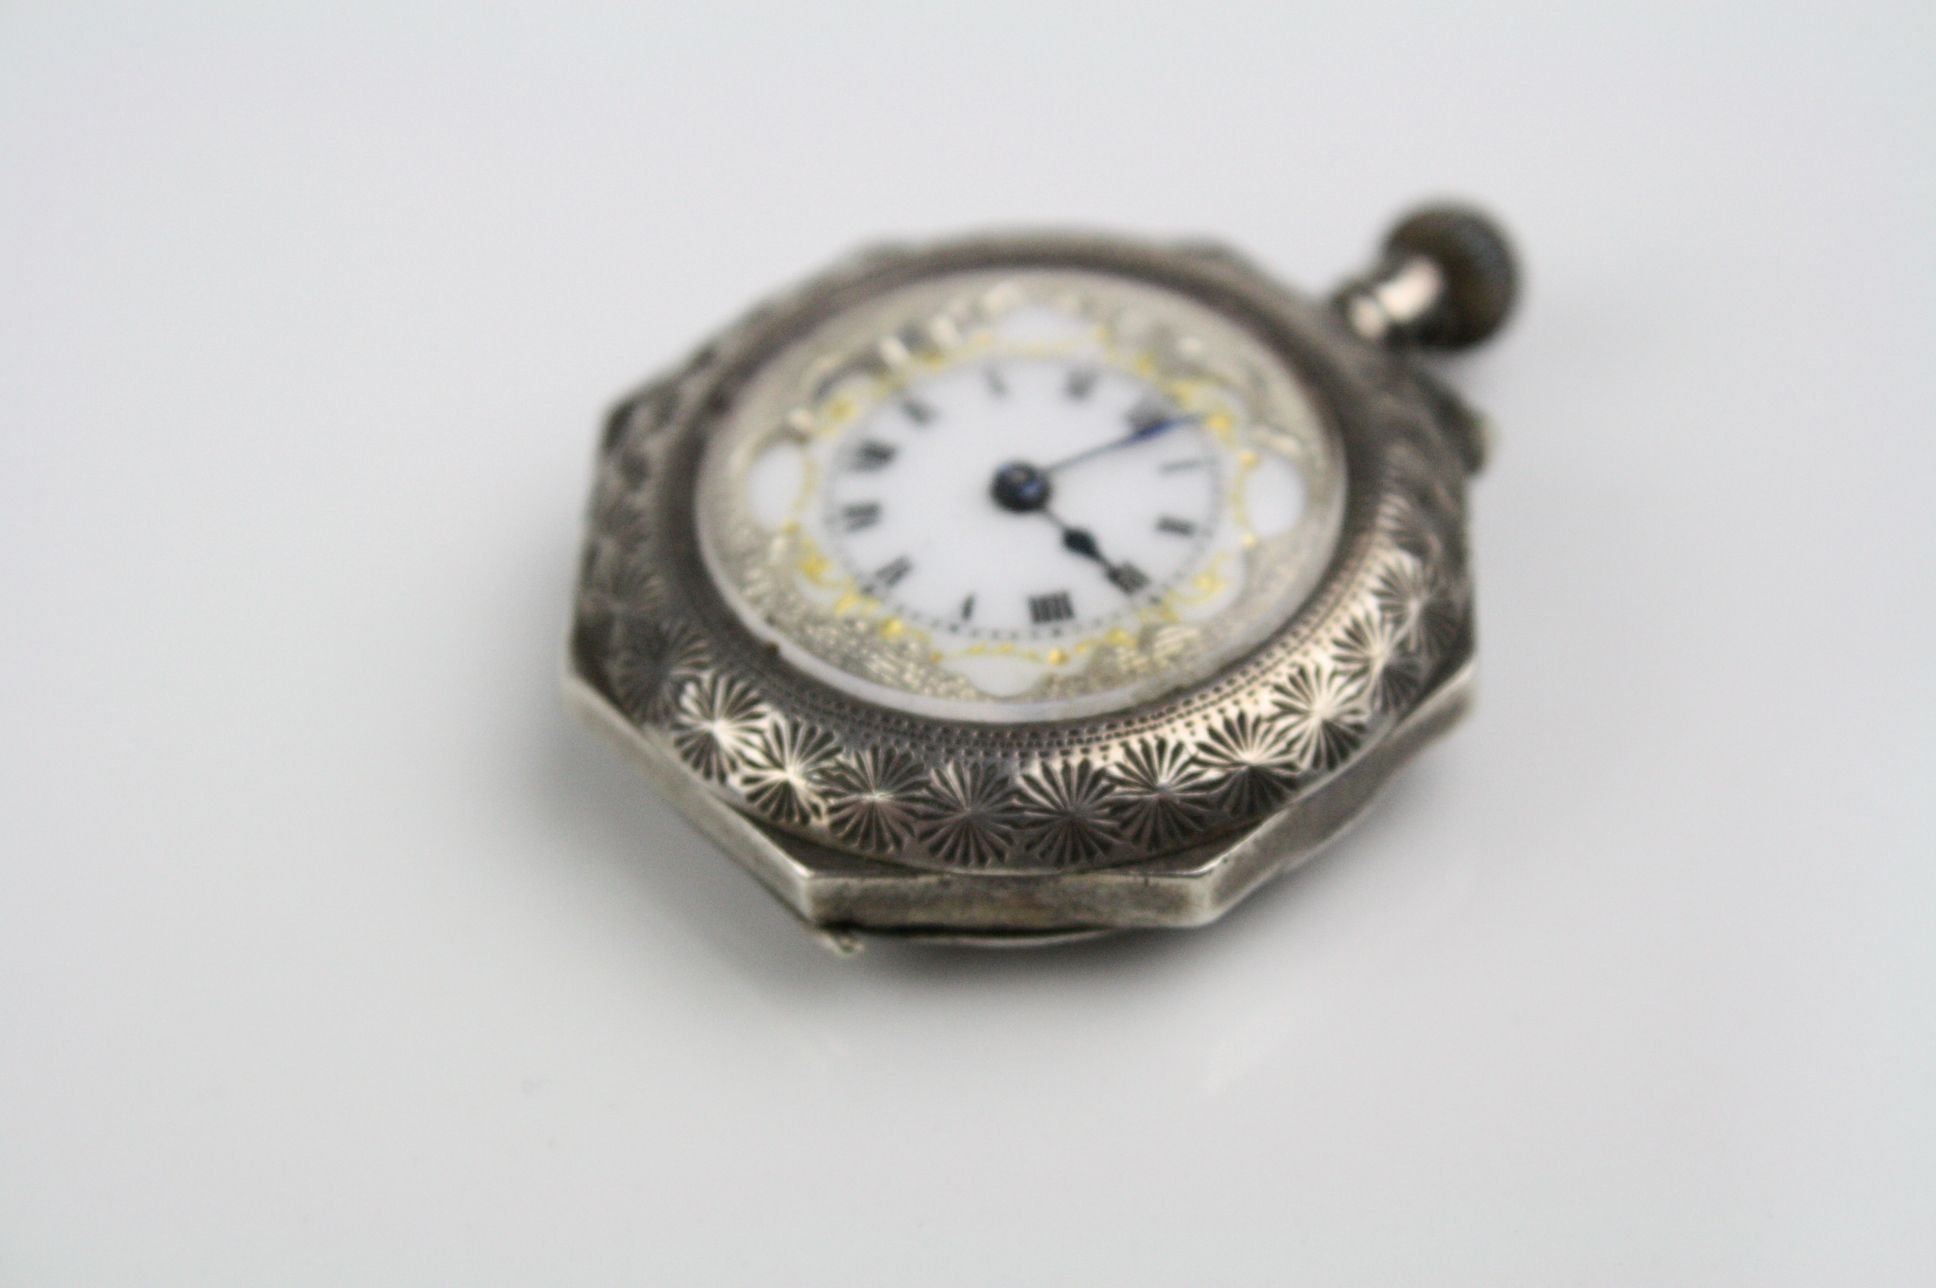 Early 20th century enamelled silver top wind hexagonal fob watch, white enamel dial with gilt - Image 2 of 6